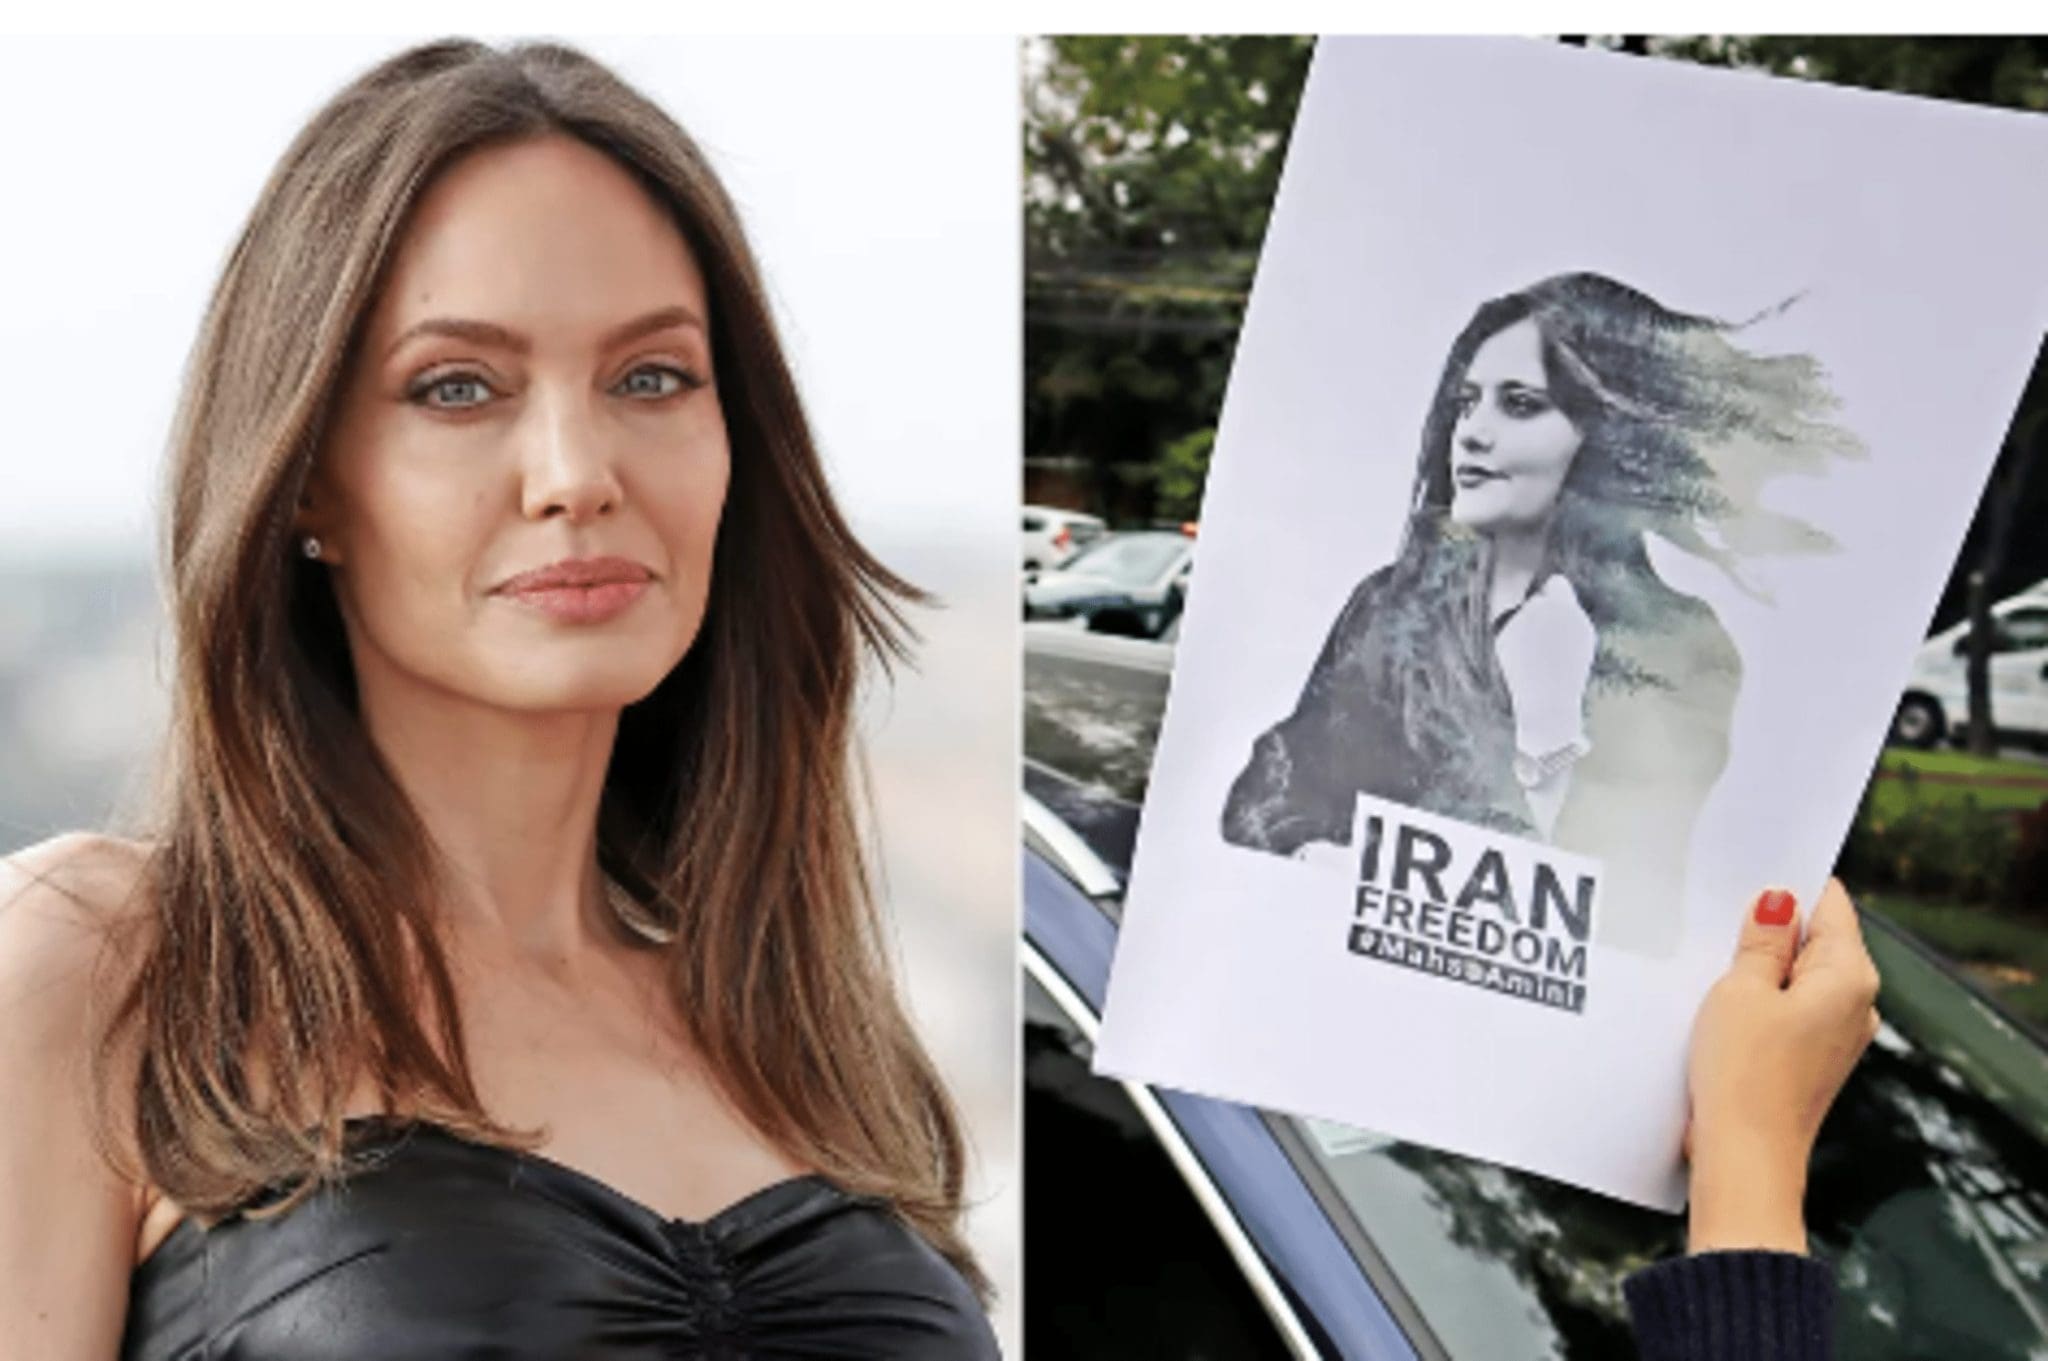 Protests persist in Iran following the death of Mahsa Amini, and Angelina Jolie says women there need the freedom to live their lives.